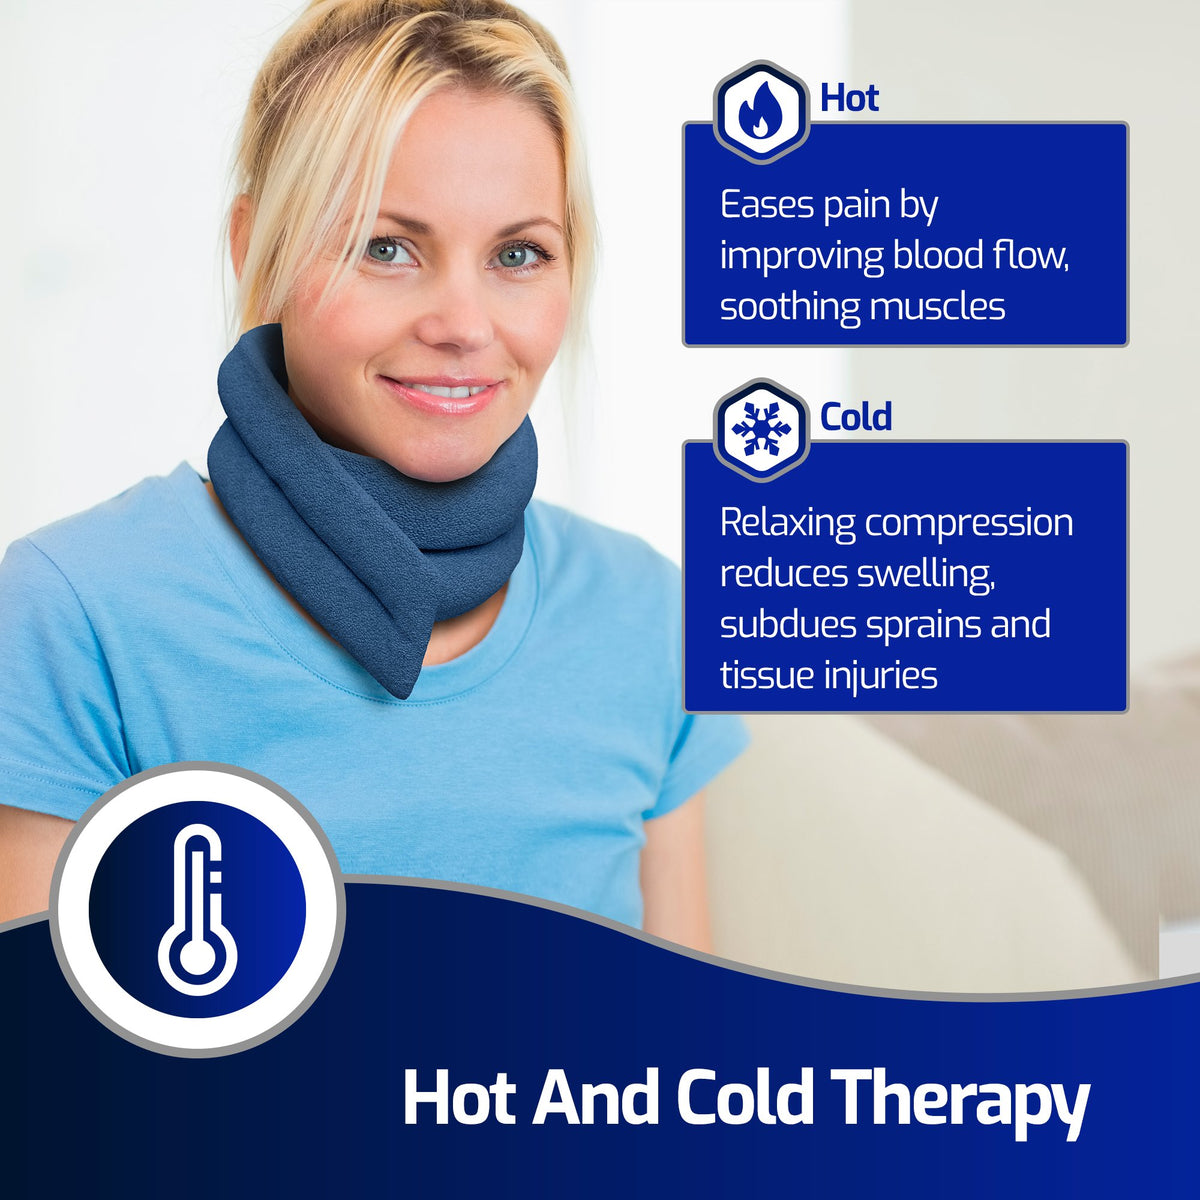 Hot or Cold Therapy Neck Wrap (17.7” x 5.5”) - Tourmaline Filling Neck Heating Pad - Blue Polyester Microwave Heating Pad for Neck and Shoulders - Spot Wash Heat and Cold Pad